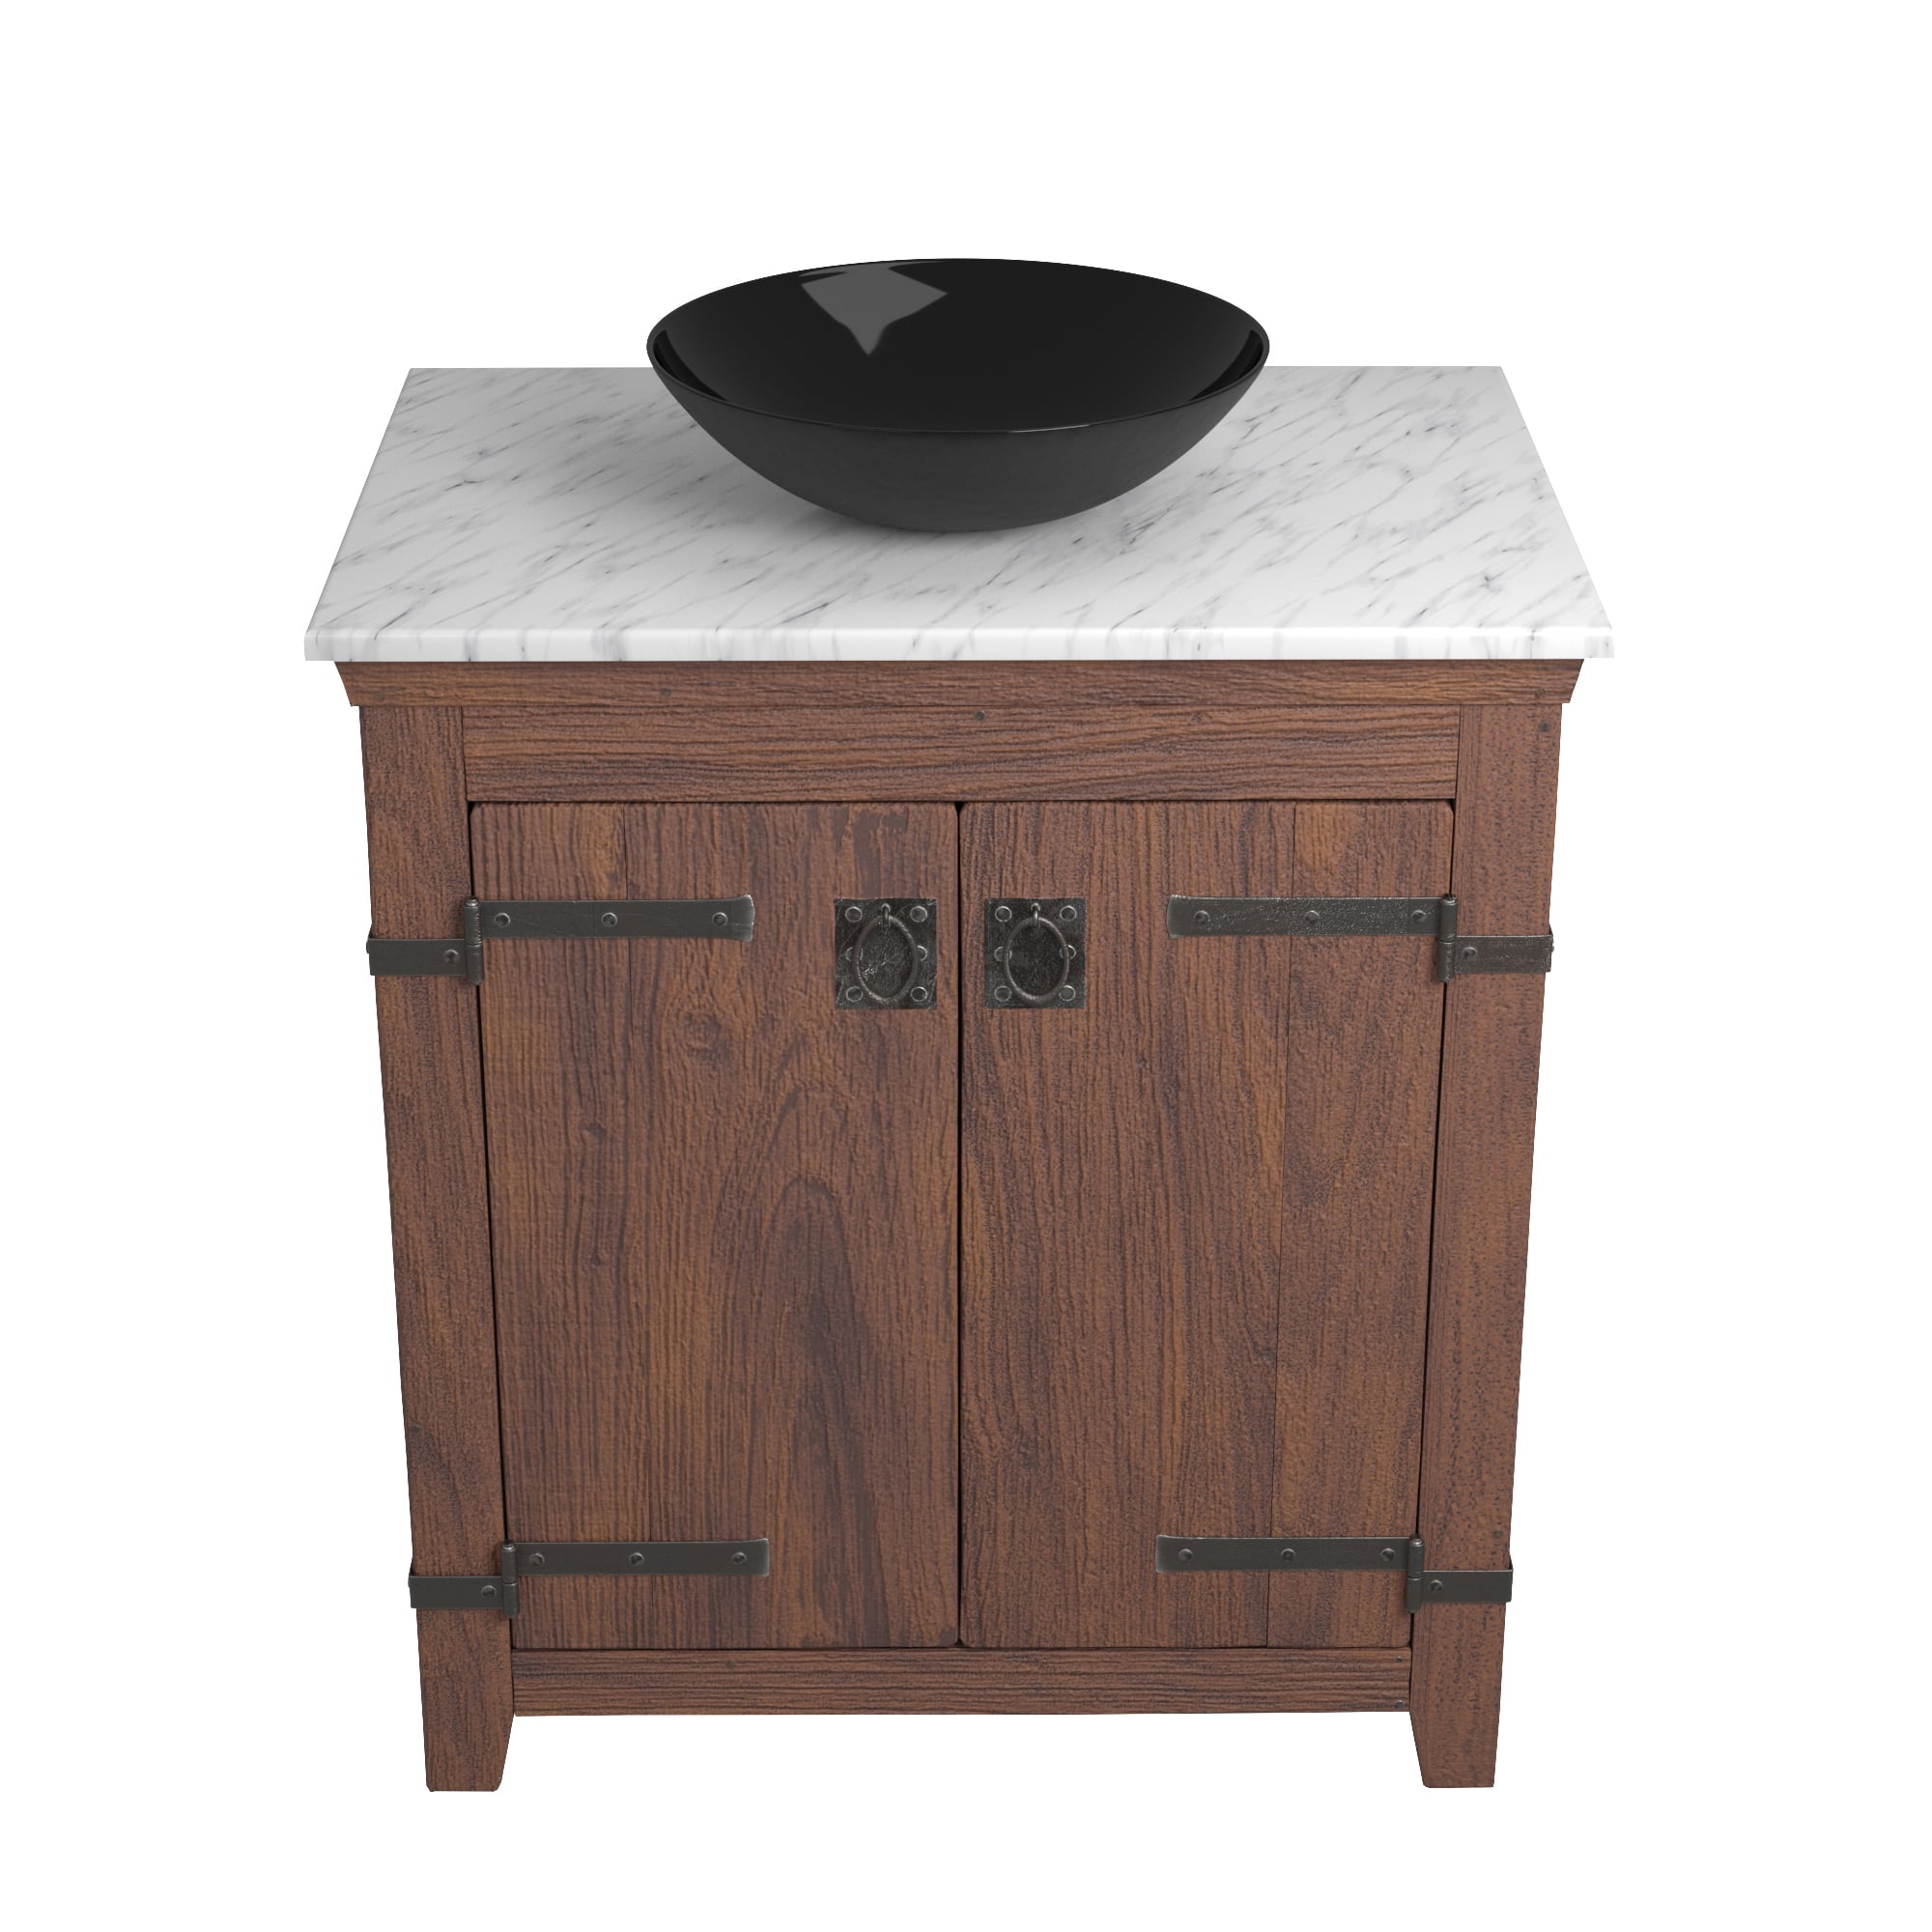 Native Trails 30" Americana Vanity in Chestnut with Carrara Marble Top and Verona in Abyss, Single Faucet Hole, BND30-VB-CT-MG-067